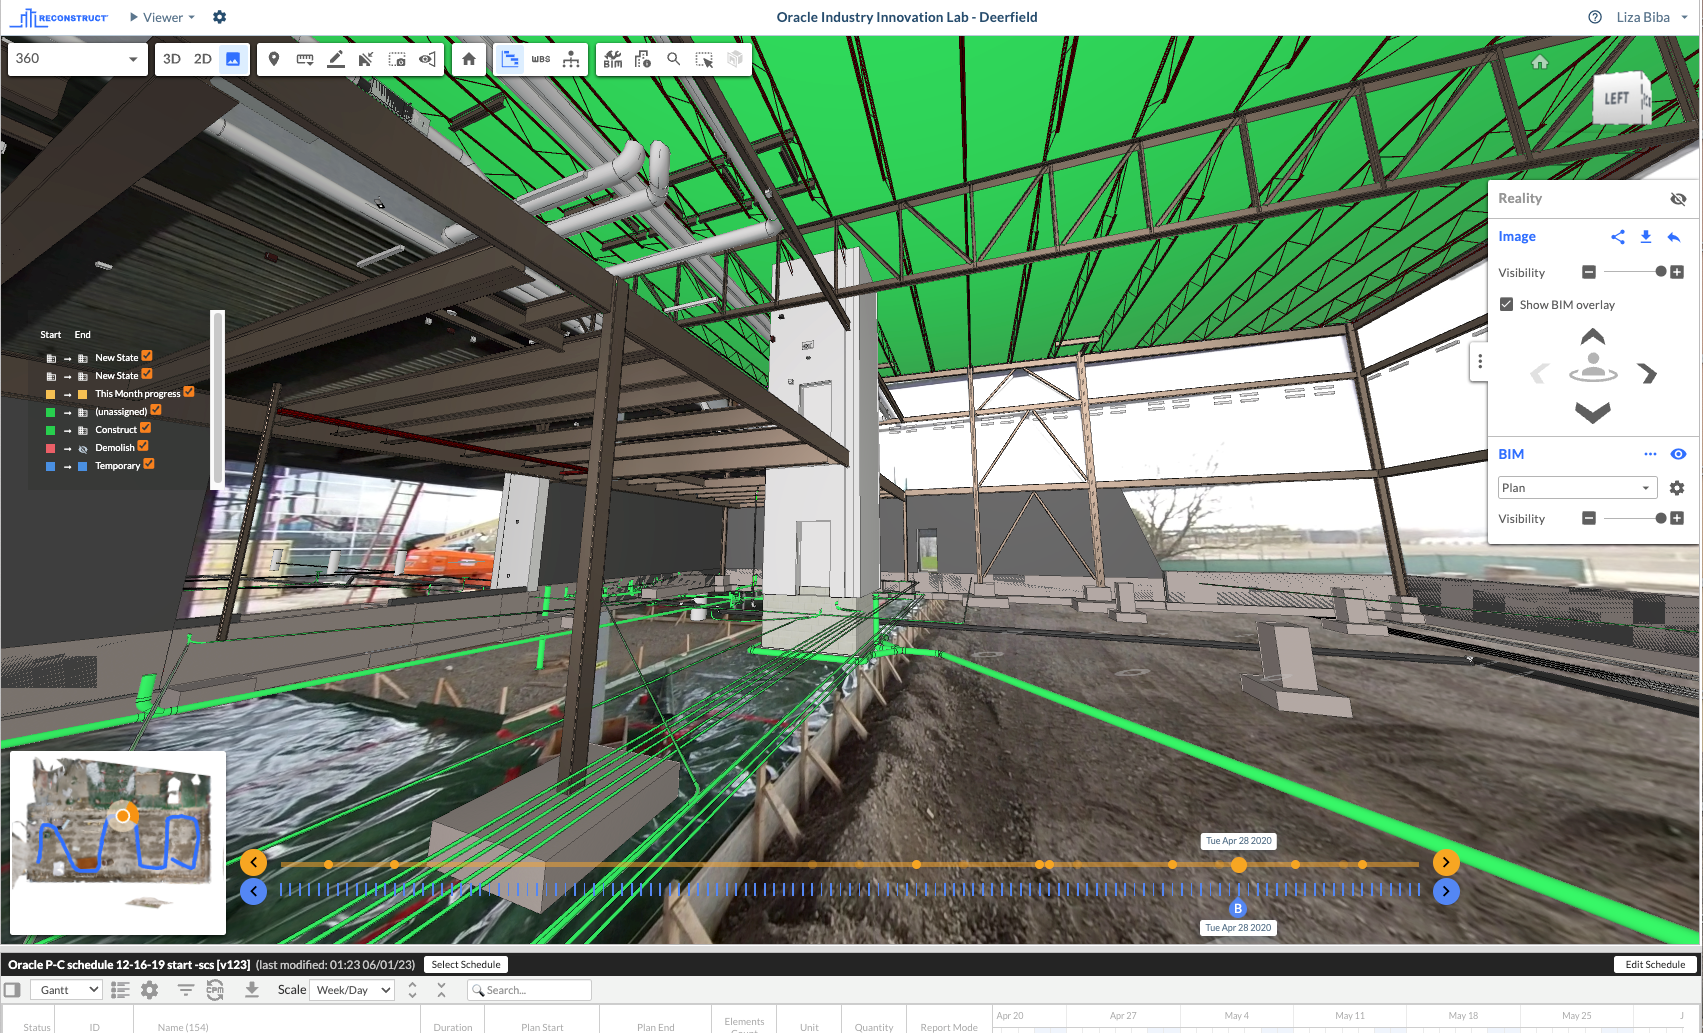 4D BIM of oracle industry innovation lab 